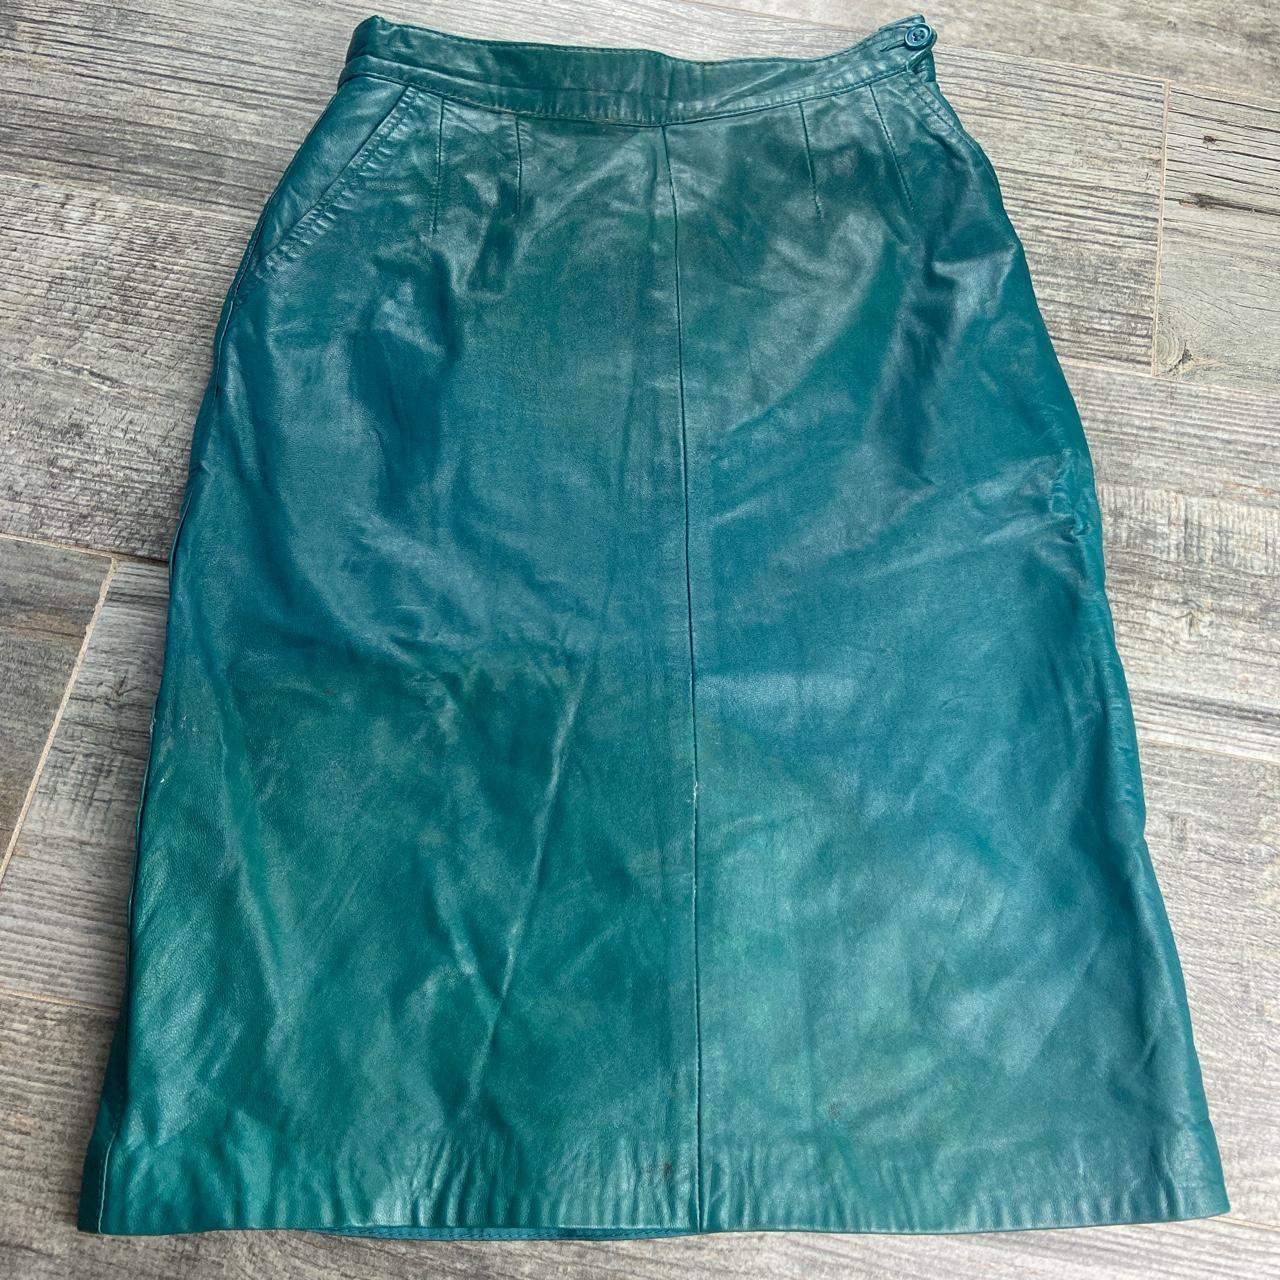 Vintage 80s 90s green leather pencil skirt by... - Depop